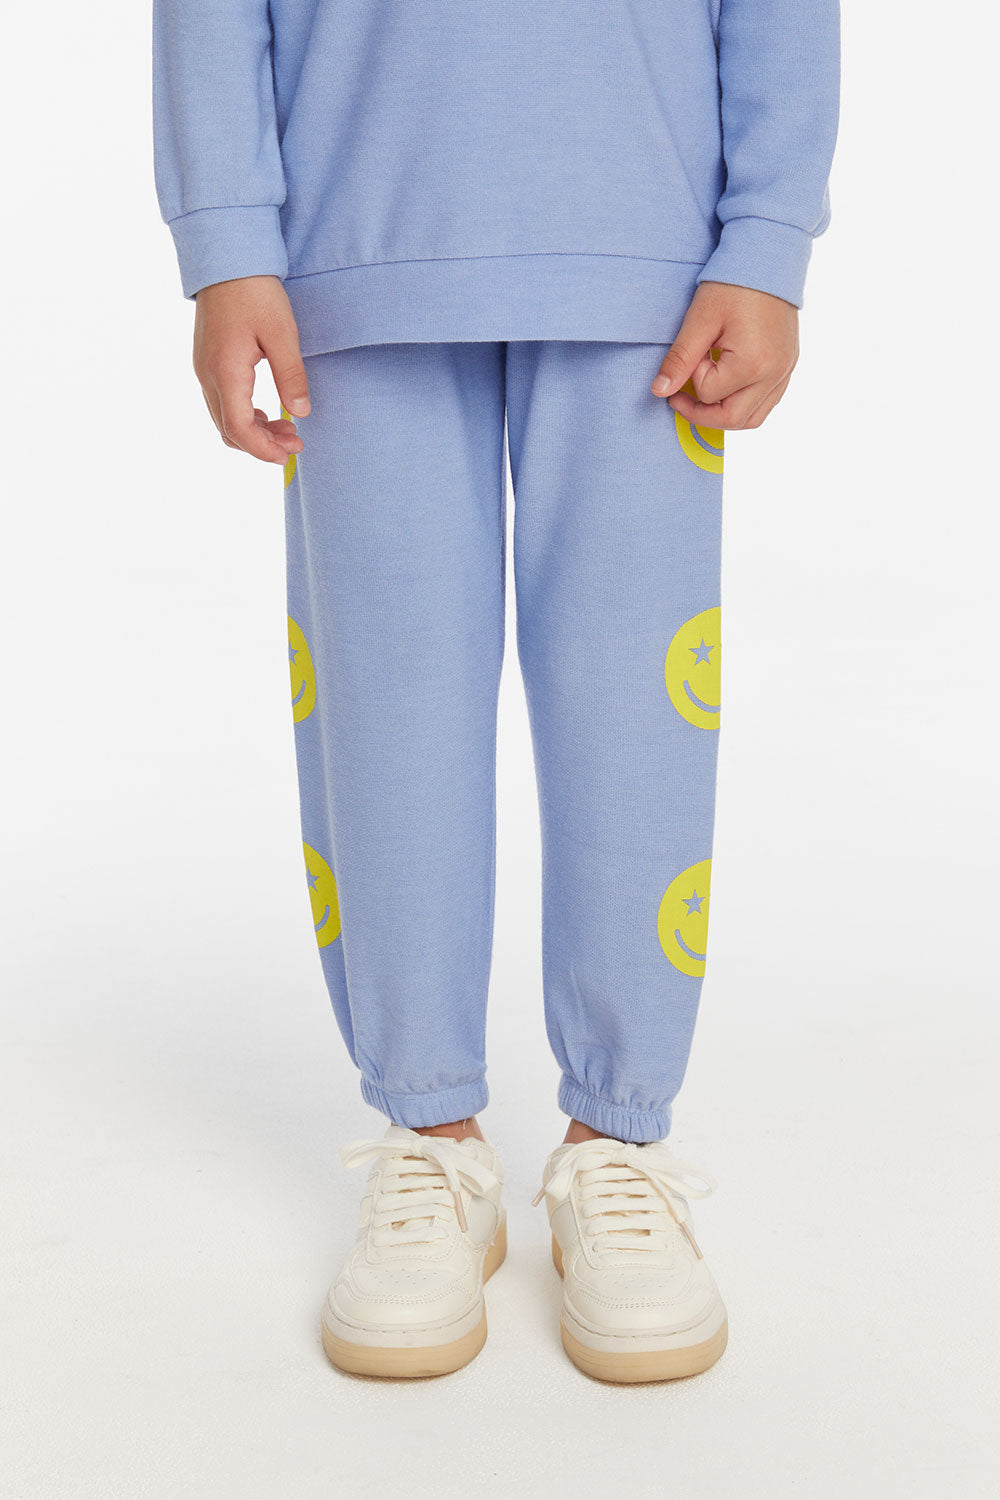 Chaser Cozy Knit Star Smiley Slim Slouchy Pant